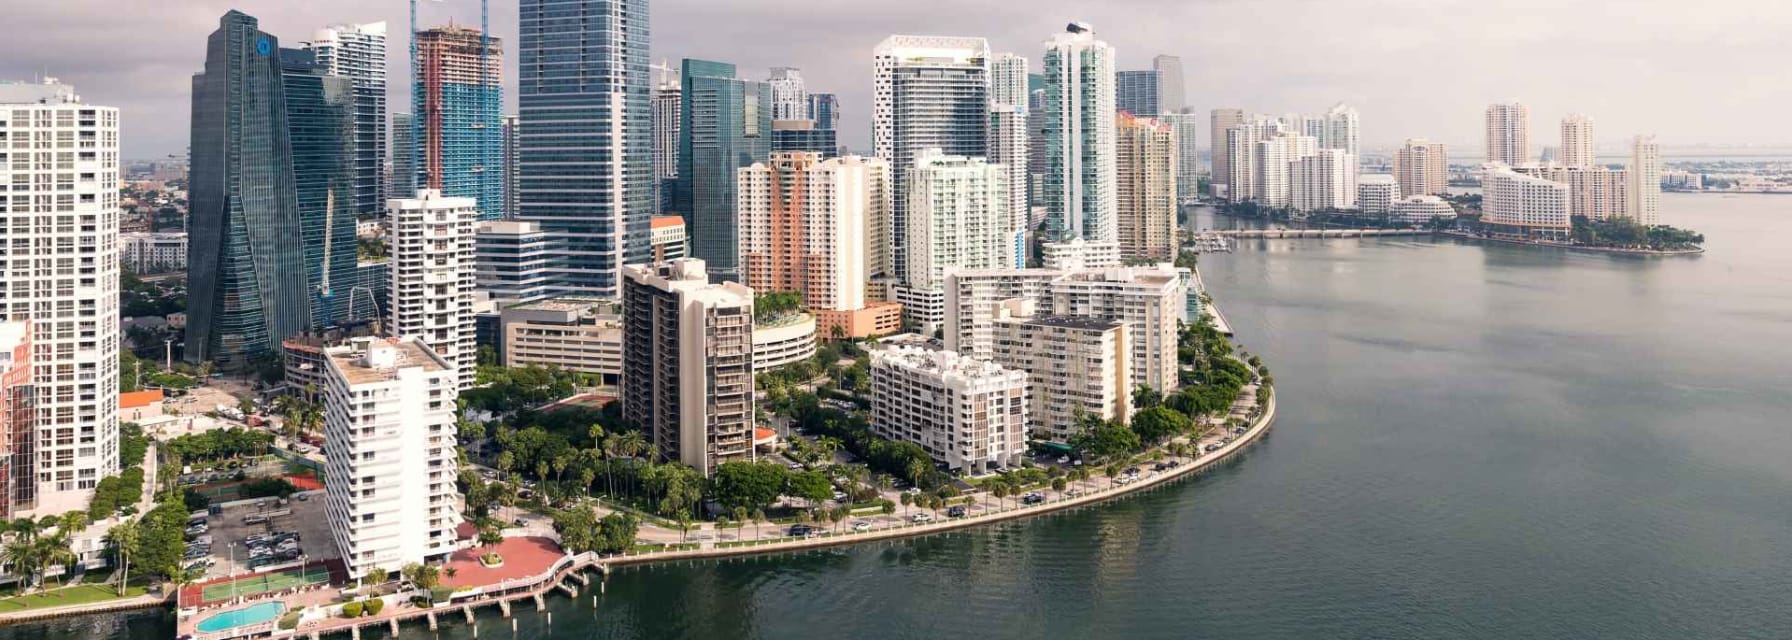 An aerial view of downtown miami. Skyscrapers are seen near the city waterfront.